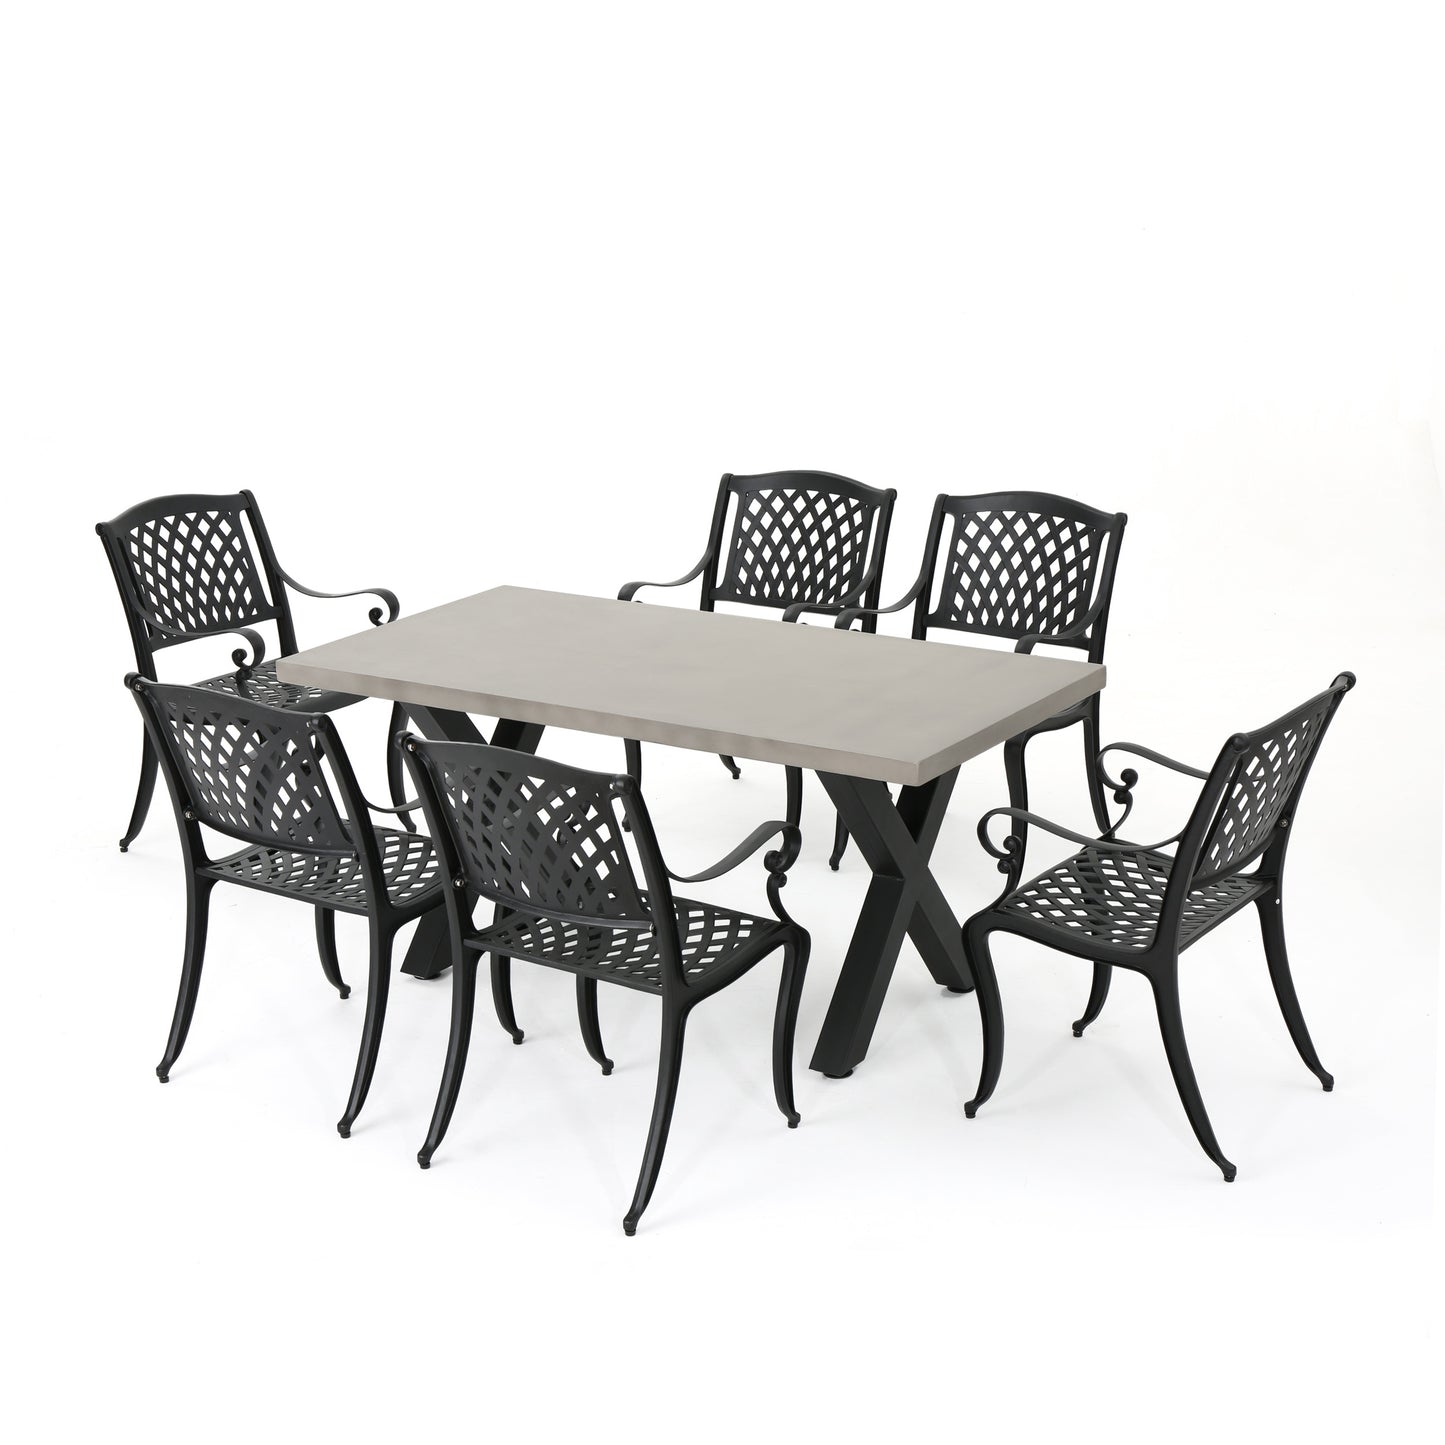 Caprice Outdoor 6 Seater Dining Set